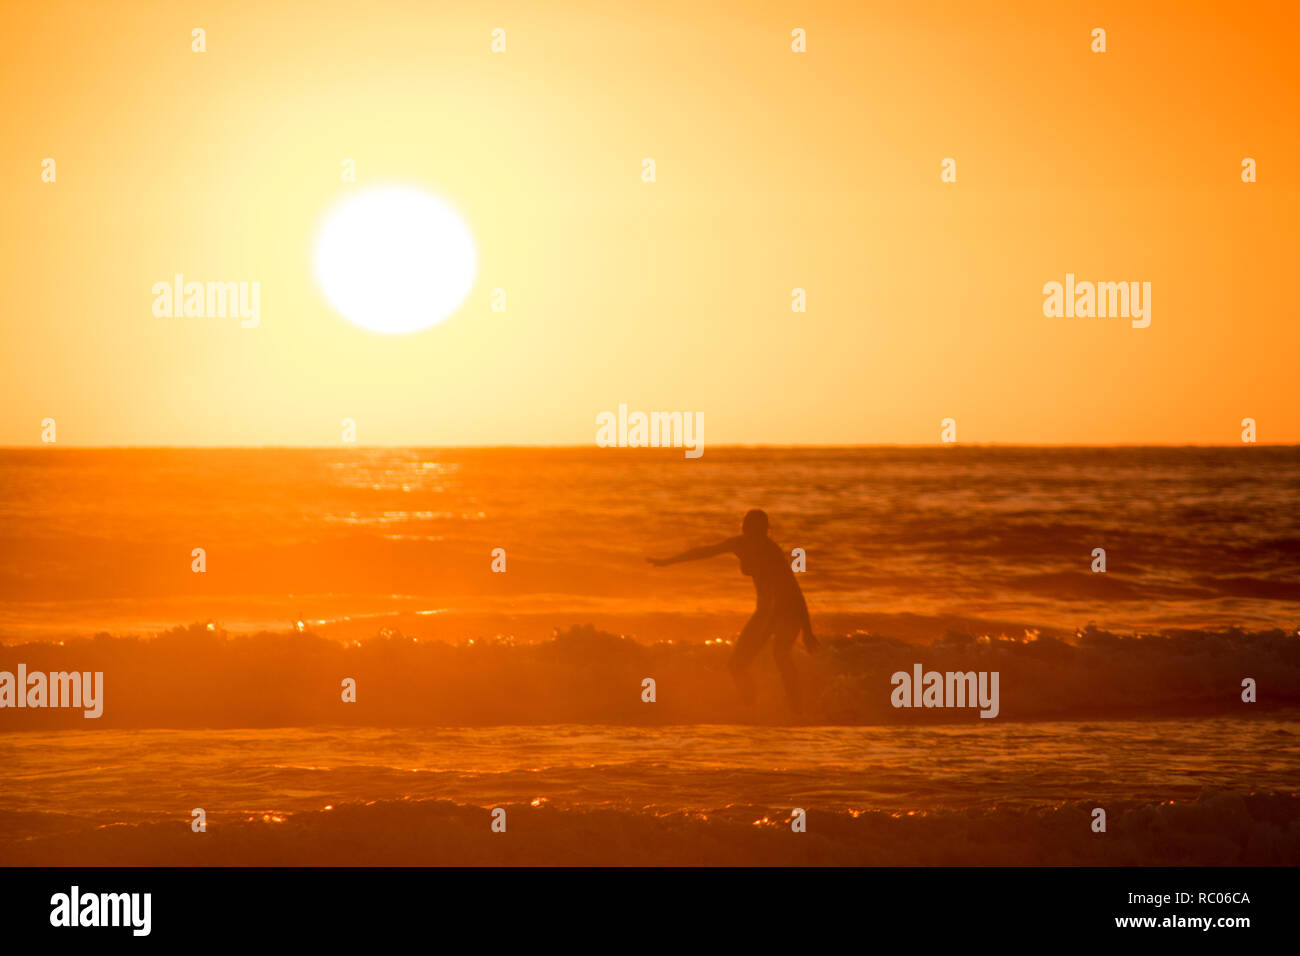 A photo of a silhouette of a woman surfing on the background of a beautiful golden sunset. Jaco Beach, Costa Rica. Person is unrecognizable. Stock Photo